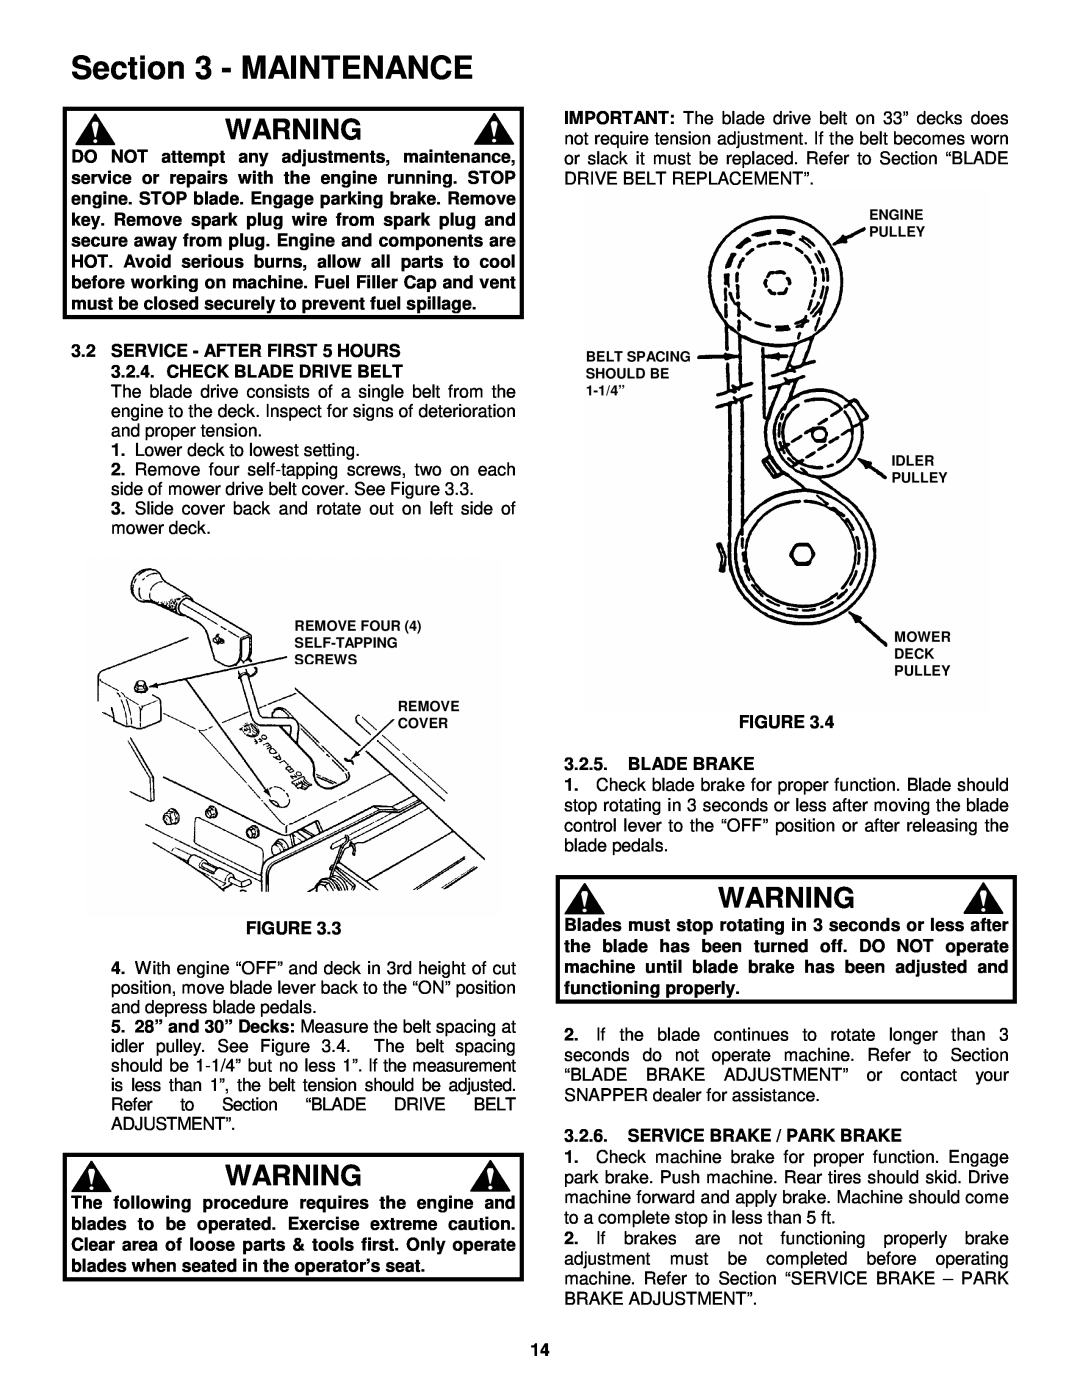 Snapper important safety instructions Maintenance, SERVICE - AFTER FIRST 5 HOURS 3.2.4. CHECK BLADE DRIVE BELT 